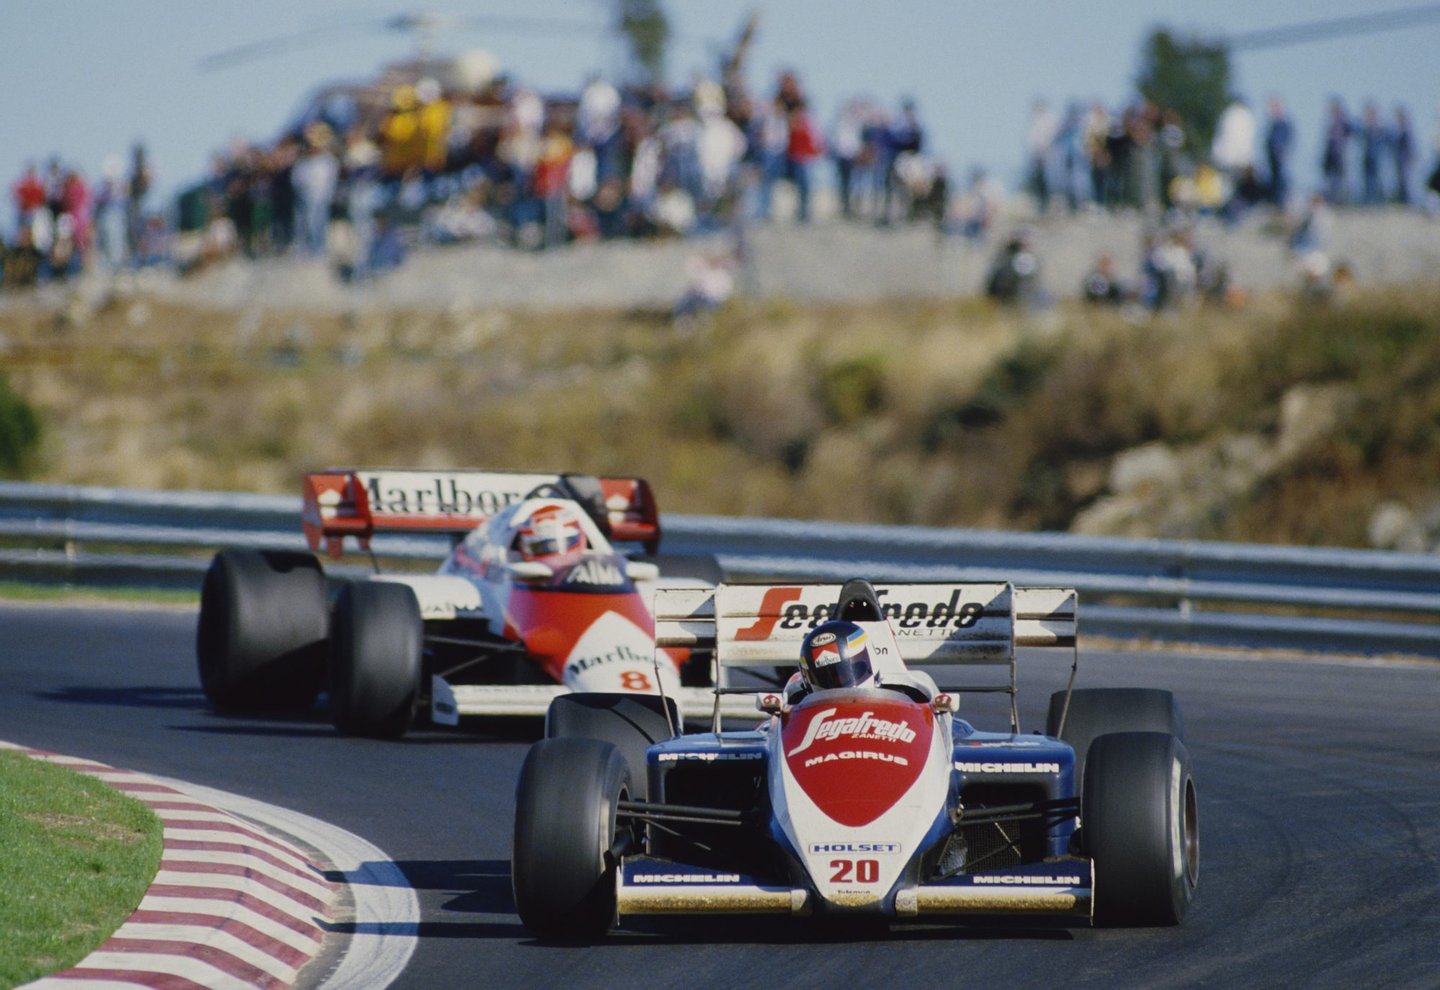 Stefan Johansson of Sweden drives the #20 Toleman Group Motorsport Toleman TG184 Hart Straight-4 turbo ahead of Niki Lauda during the Portuguese Grand Prix on 21st October 1984 at the Autodromo do Estoril in Estoril, Portugal. (Photo by Mike Powell/Getty Images)